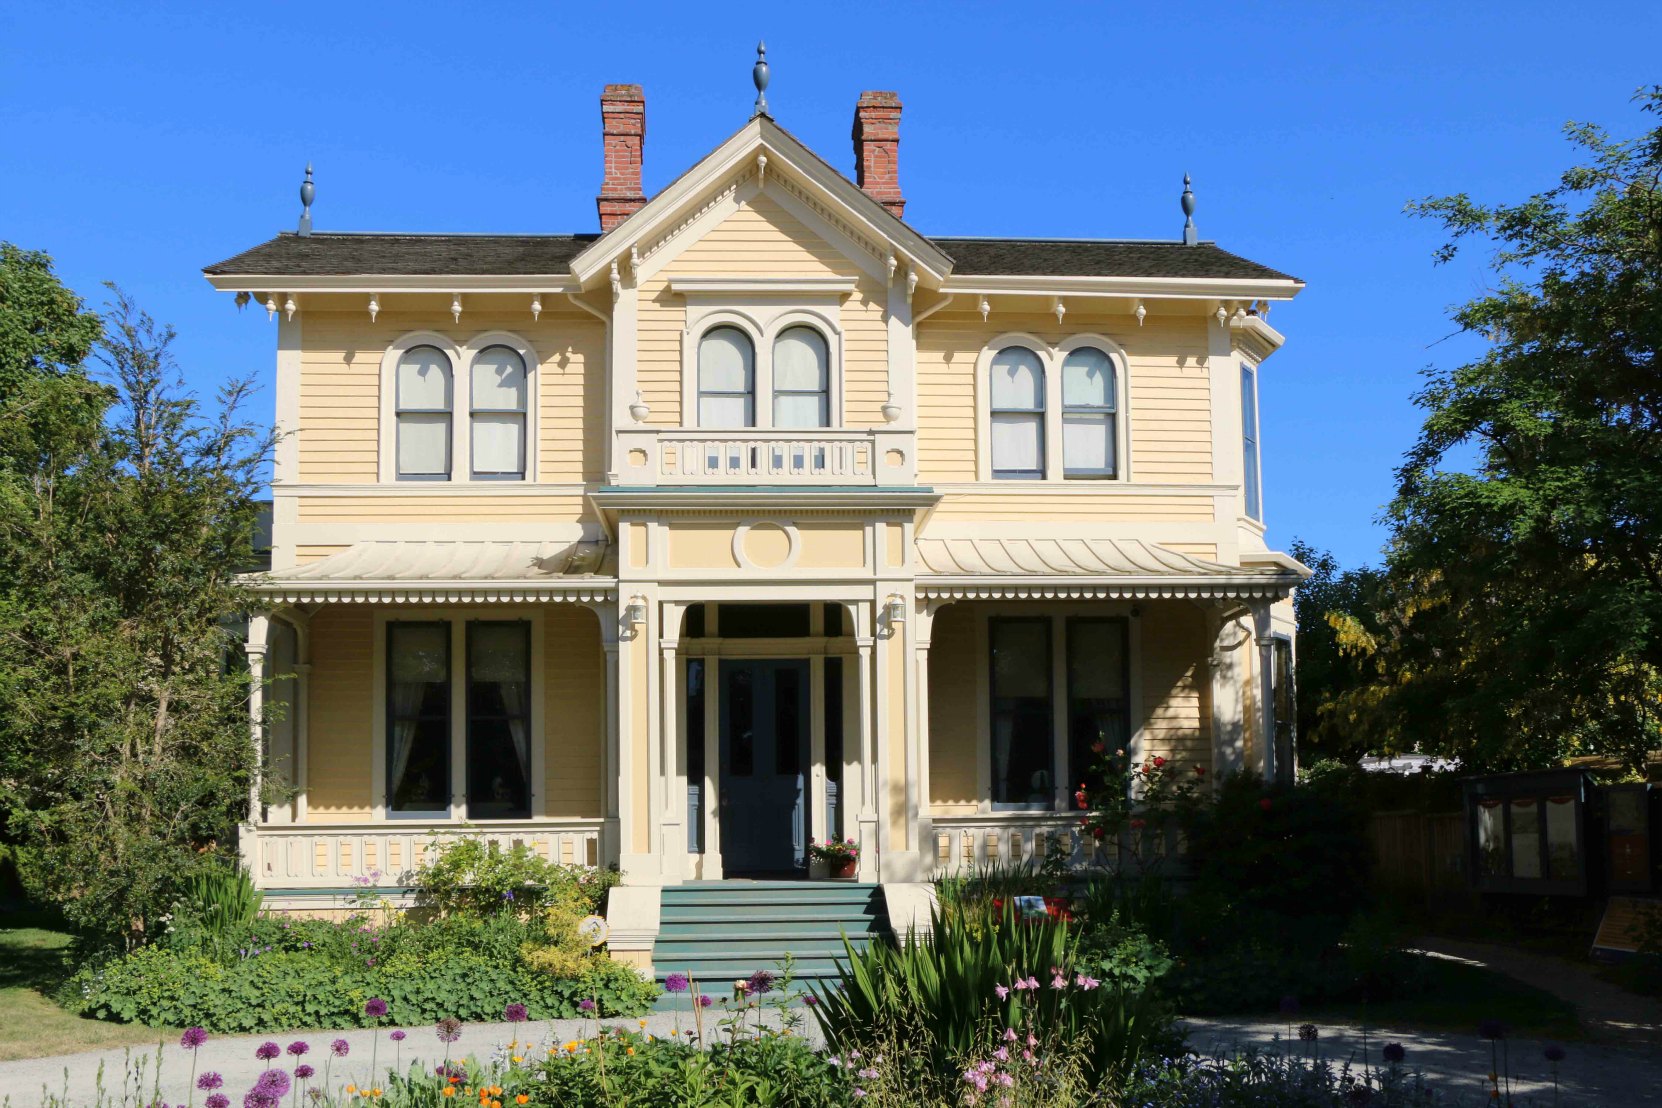 Emily Carr House, 207 Government Street, built circa 1863, is now a National Historic Site of Canada